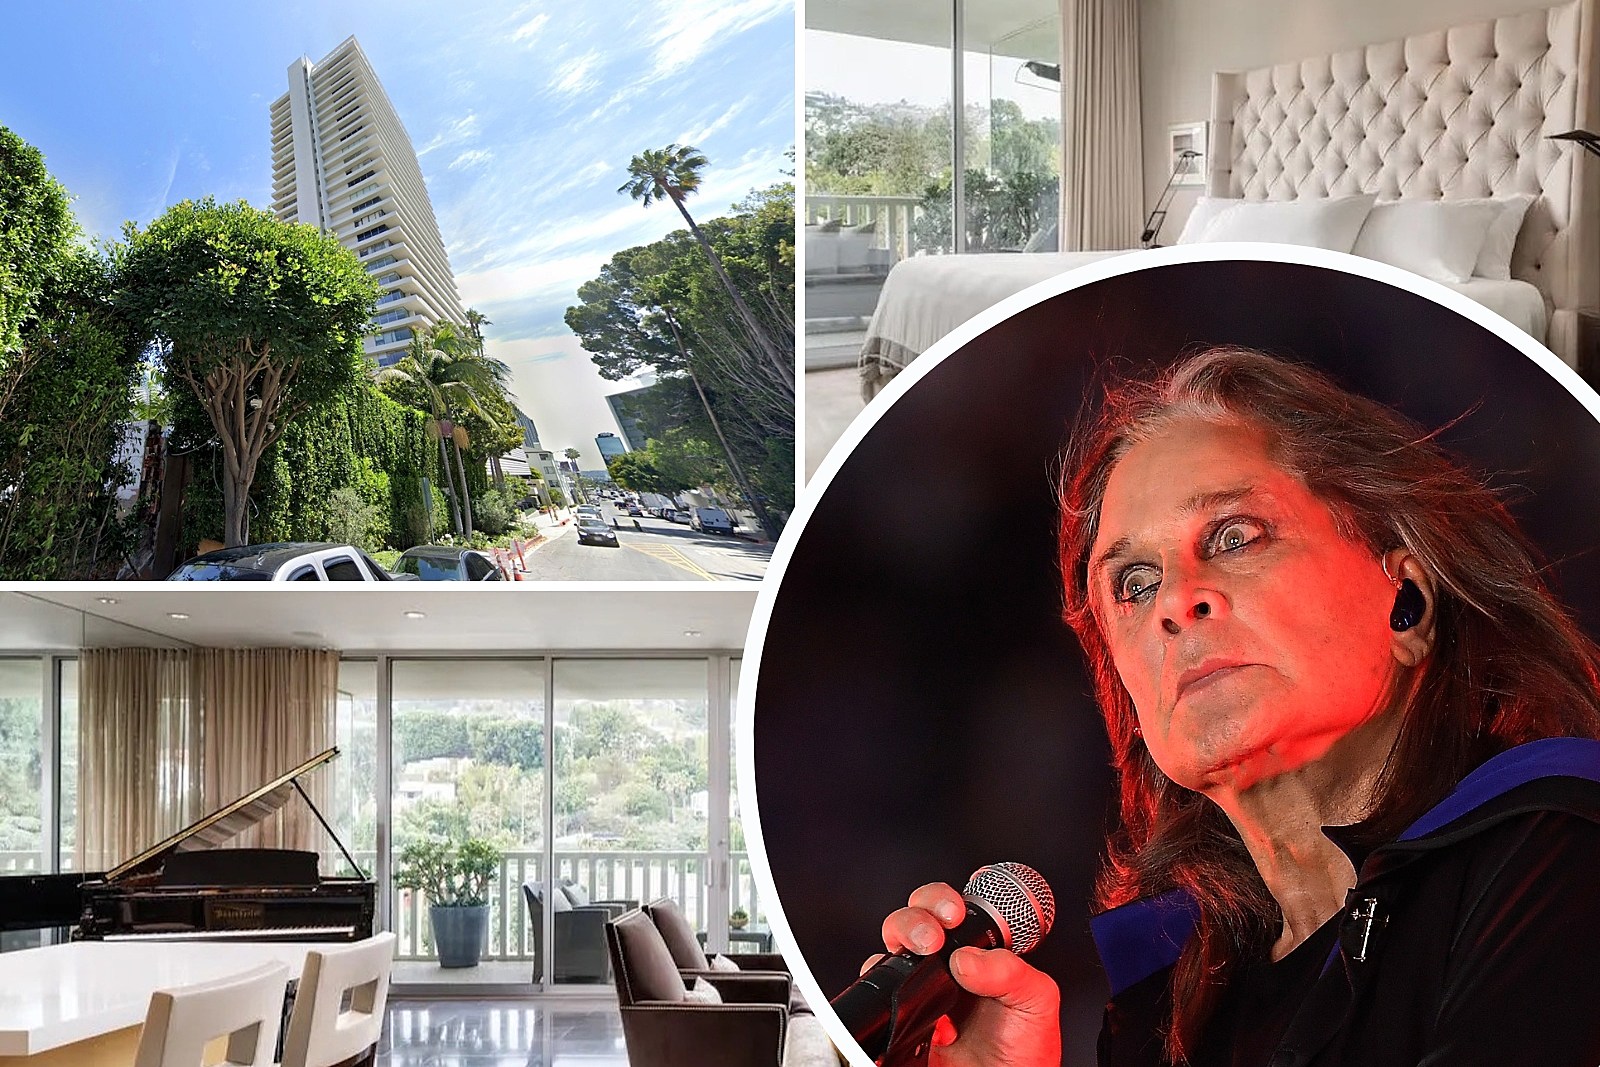 Photos – Ozzy Osbourne’s West Hollywood Condo for Rent